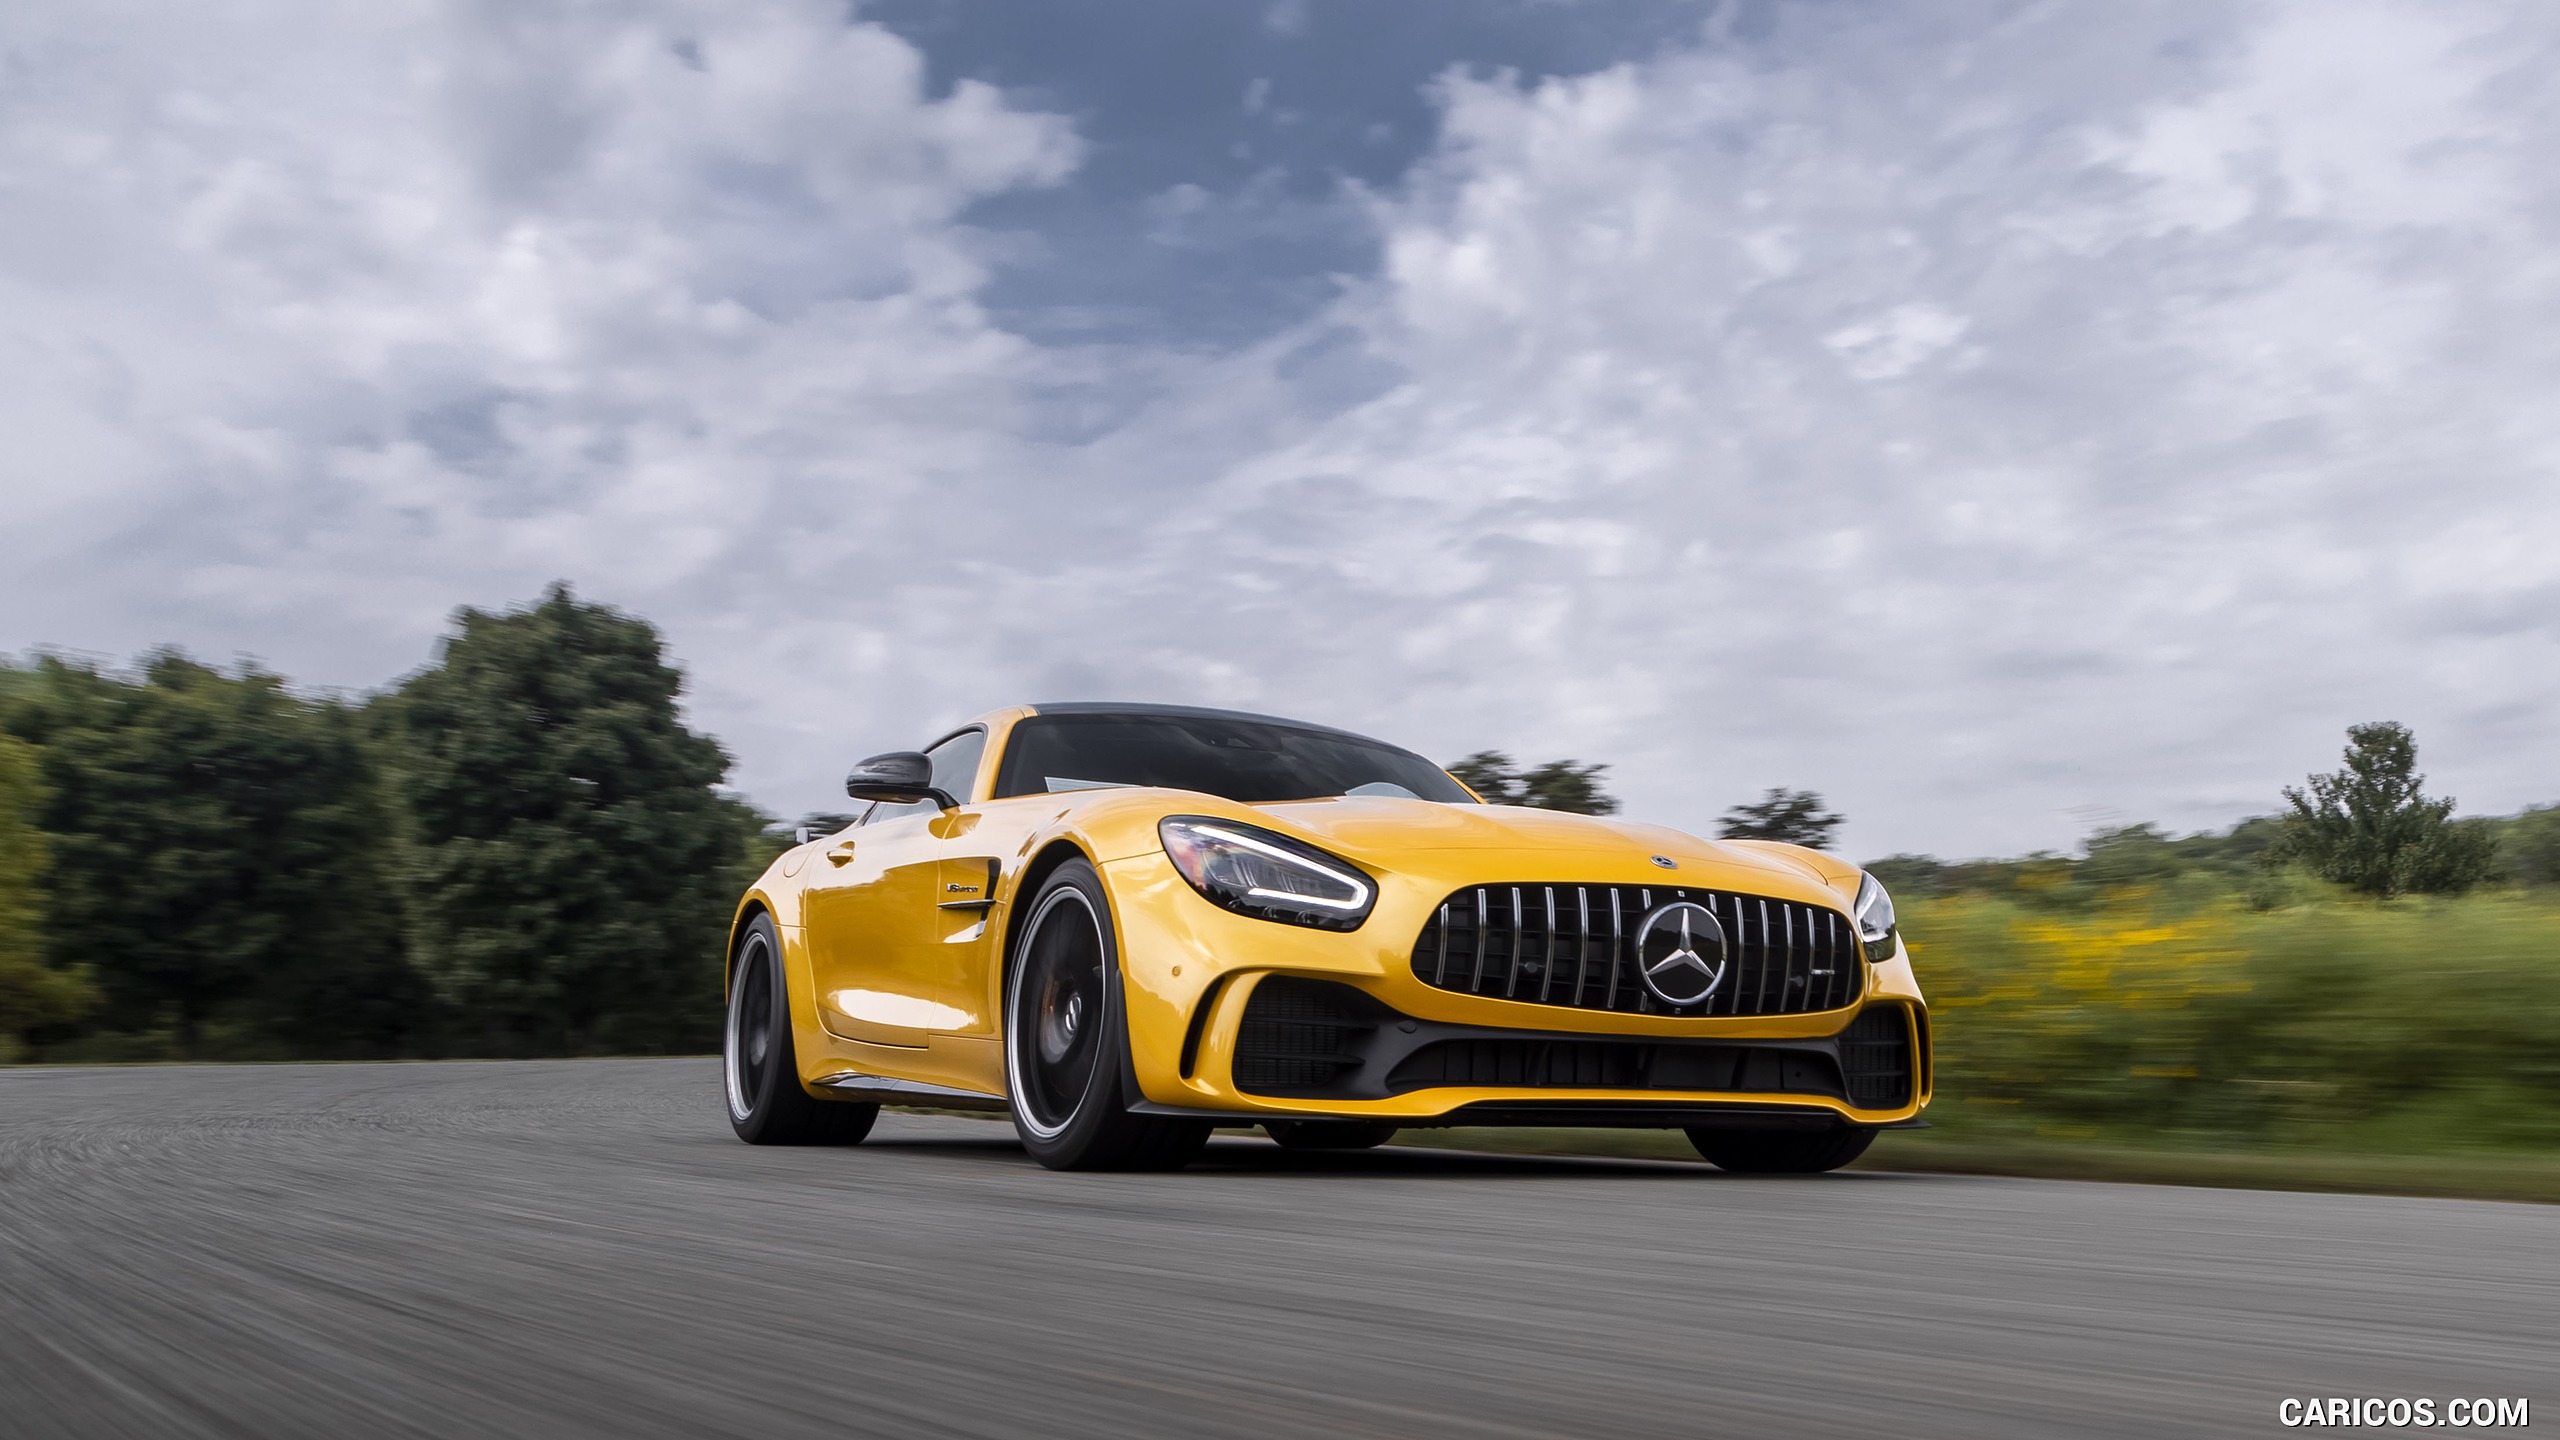 2020 Mercedes-AMG GT R Coupe (US-Spec) - Front Three-Quarter, #271 of 328